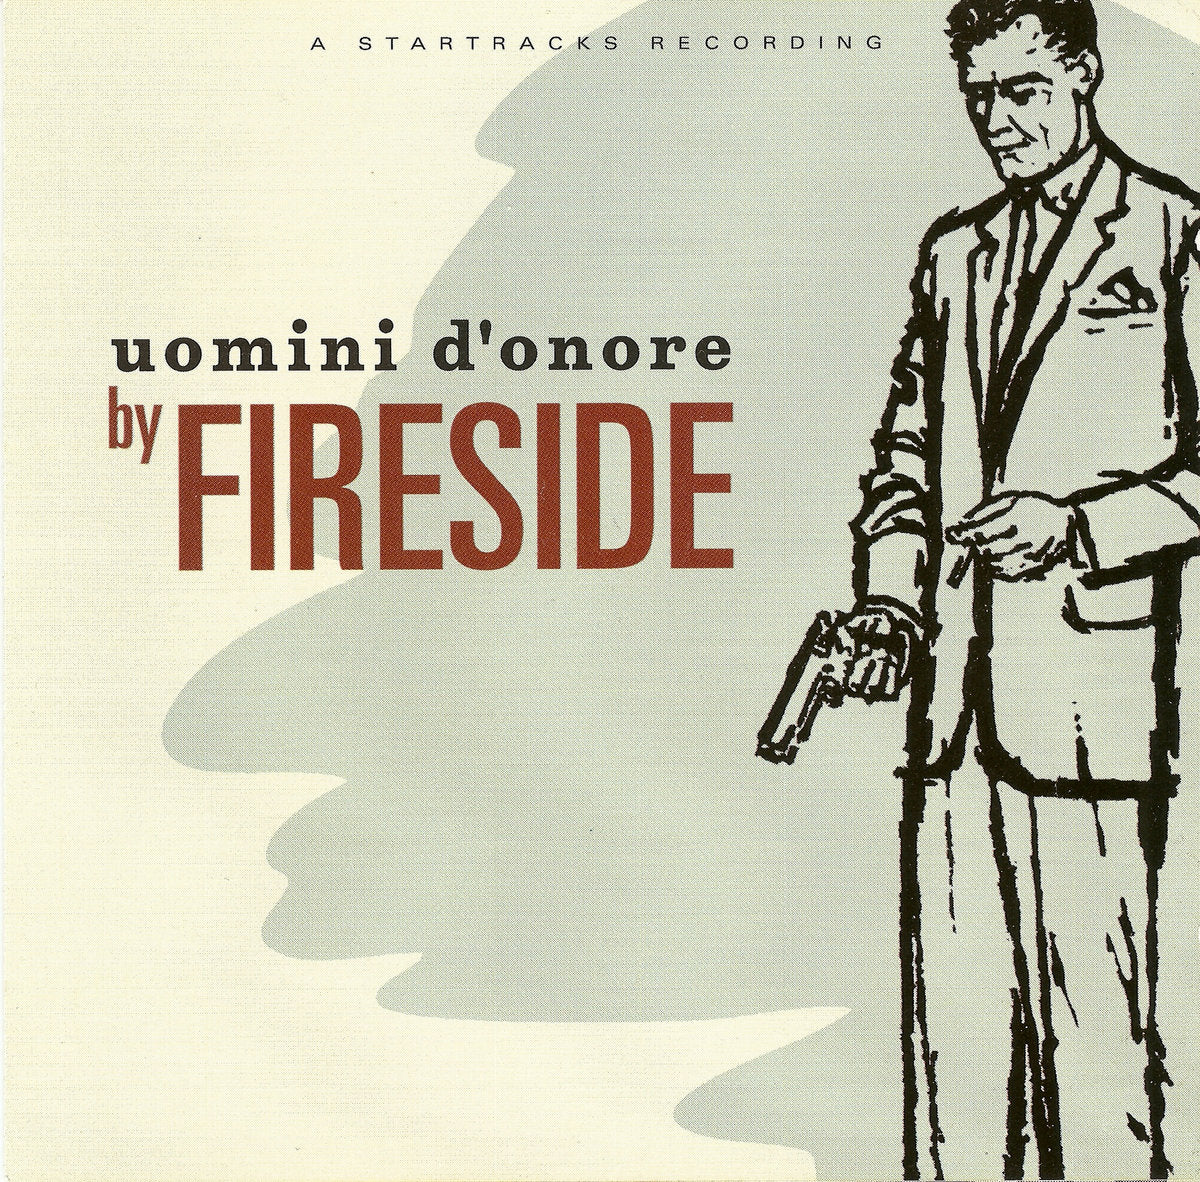 Fireside: Uomini D'onore: 30yr Anniversary Edition (IMPORT)